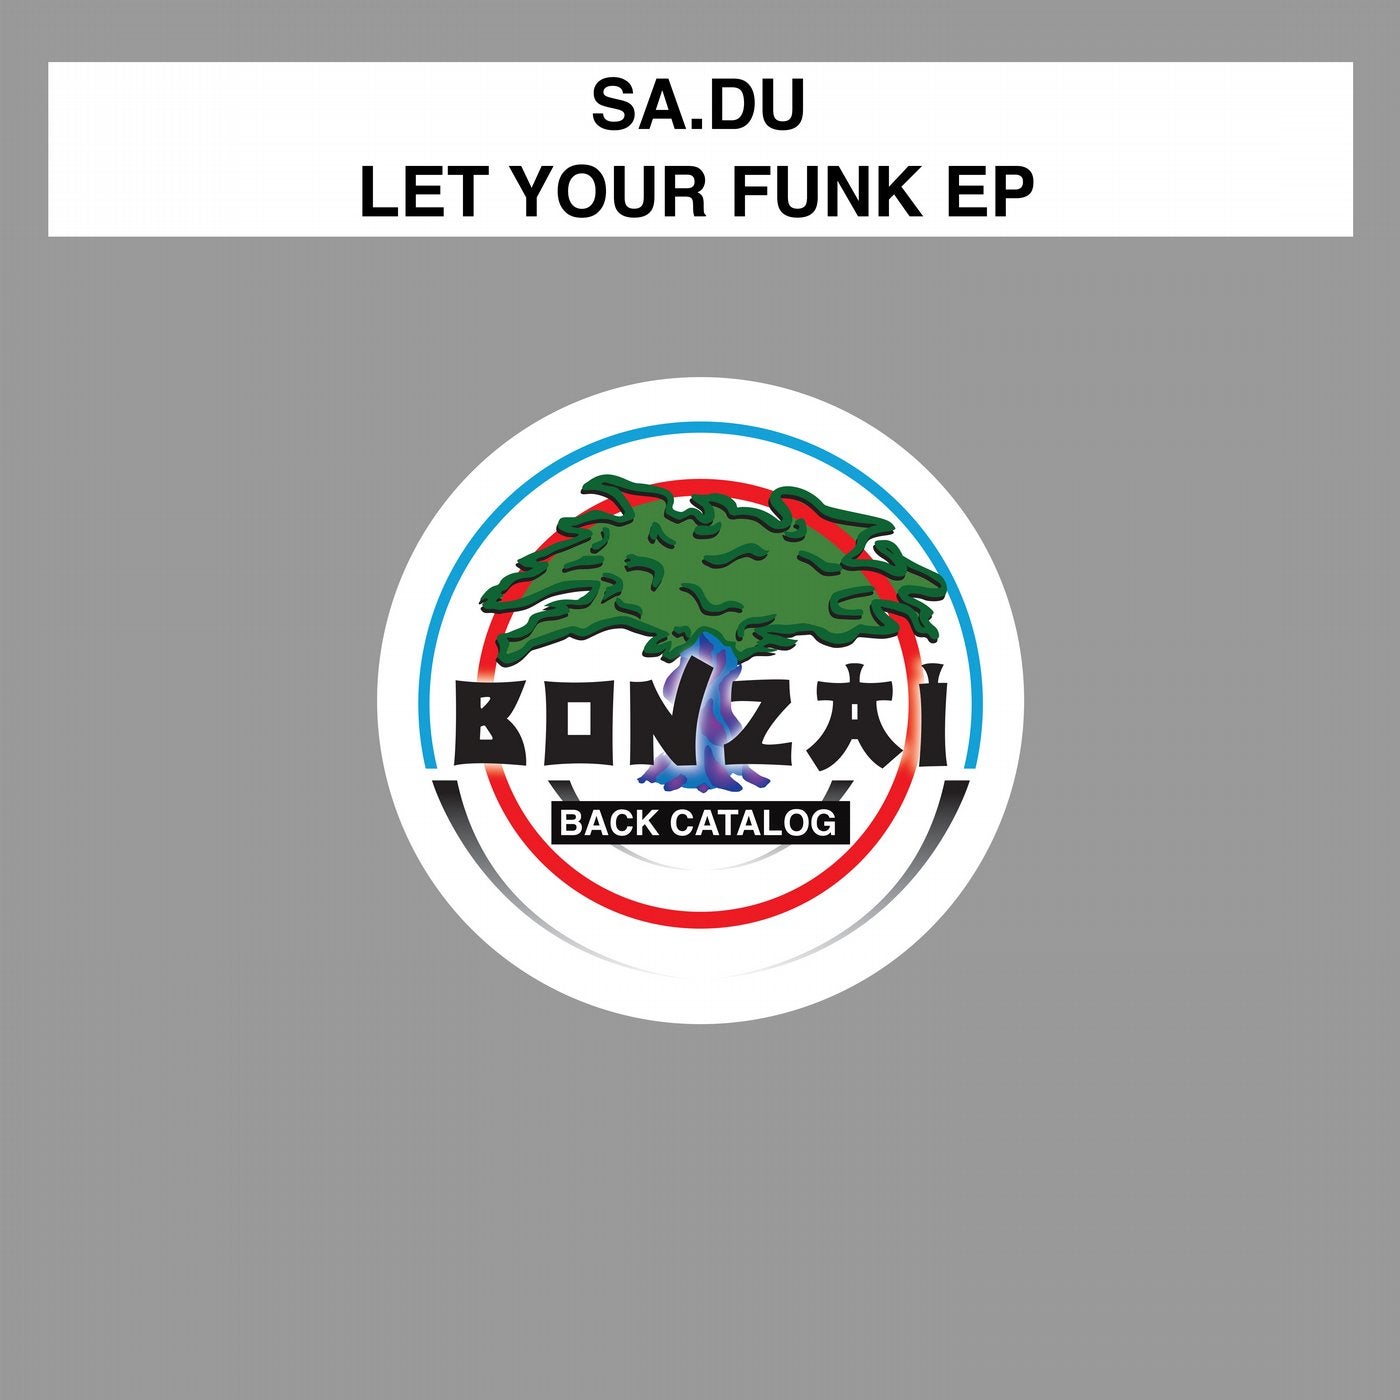 Let Your Funk EP